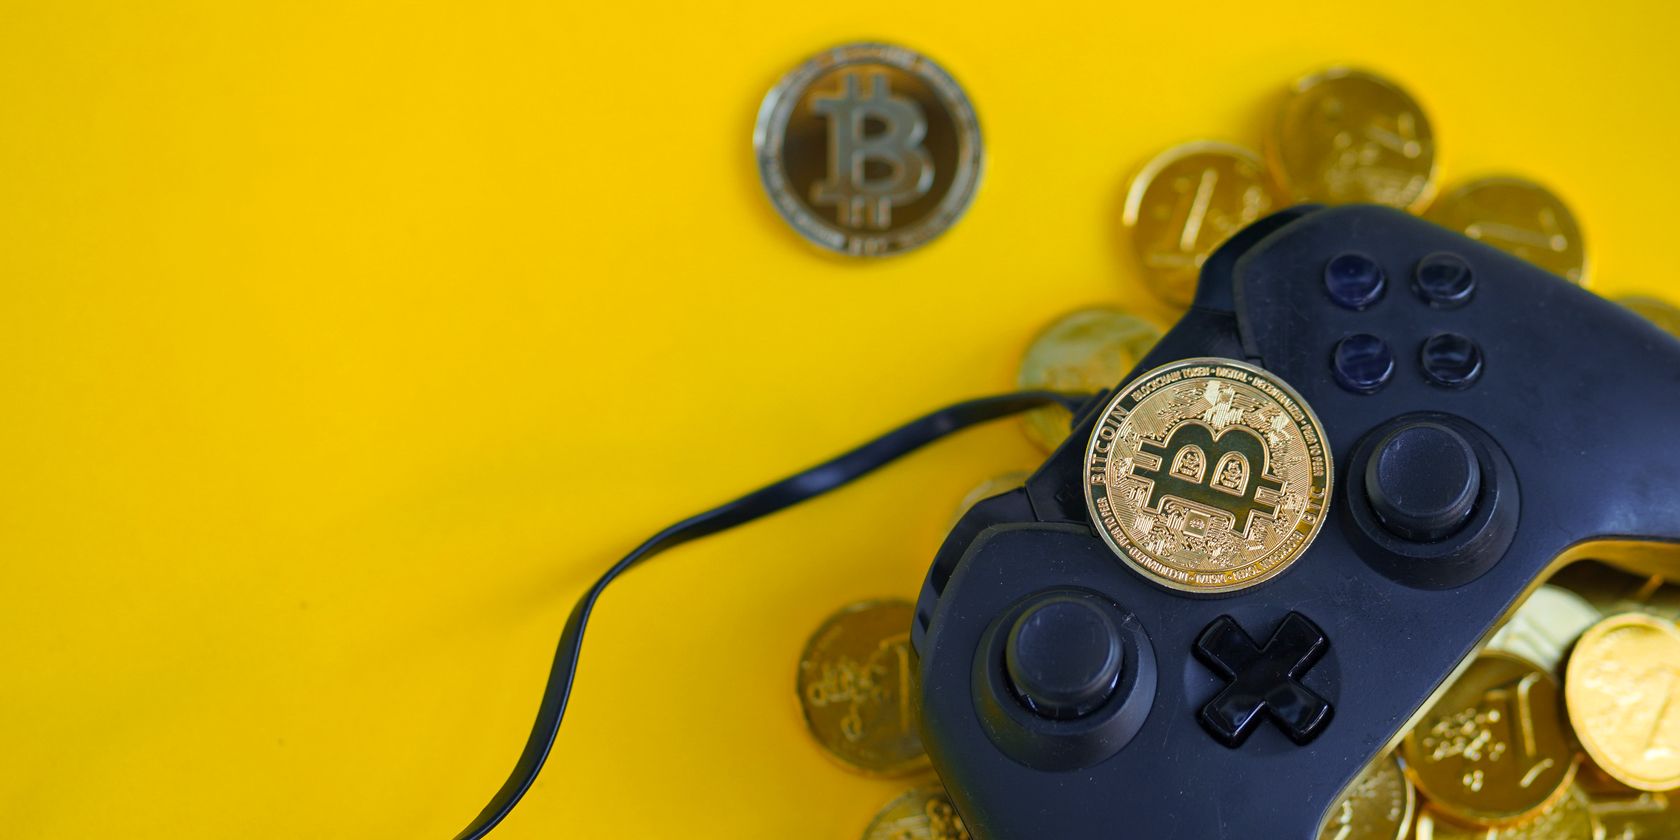 bitcoin on xbox controller play to earn feature